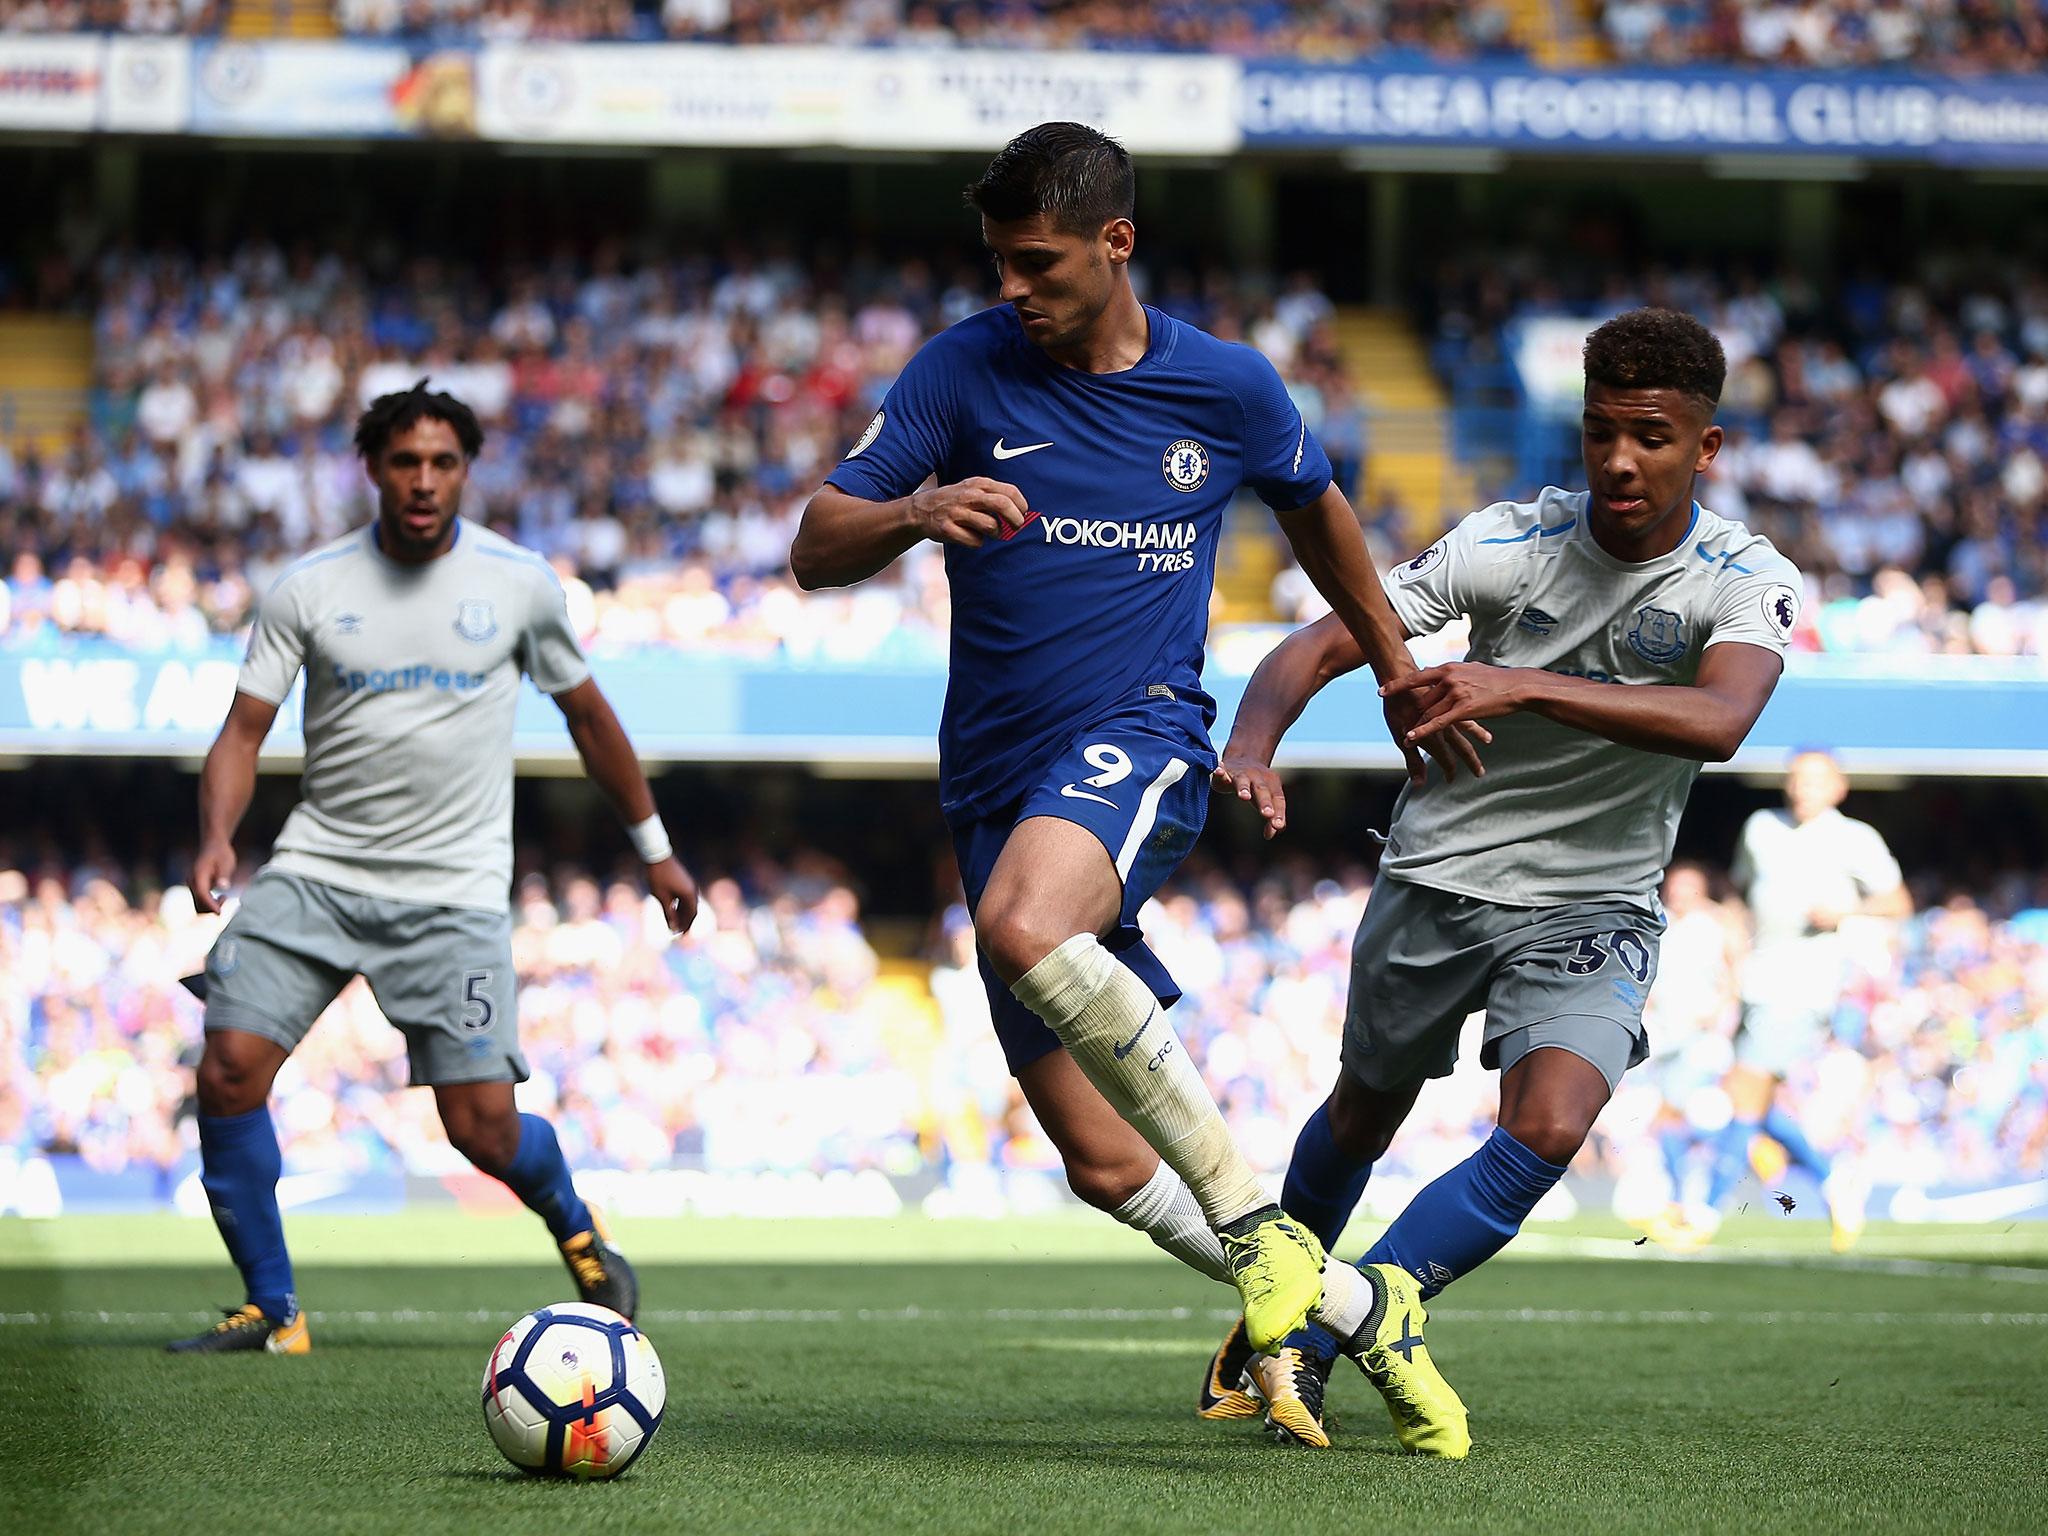 The jury is still out on Alvaro Morata - despite his respectable start to life in England